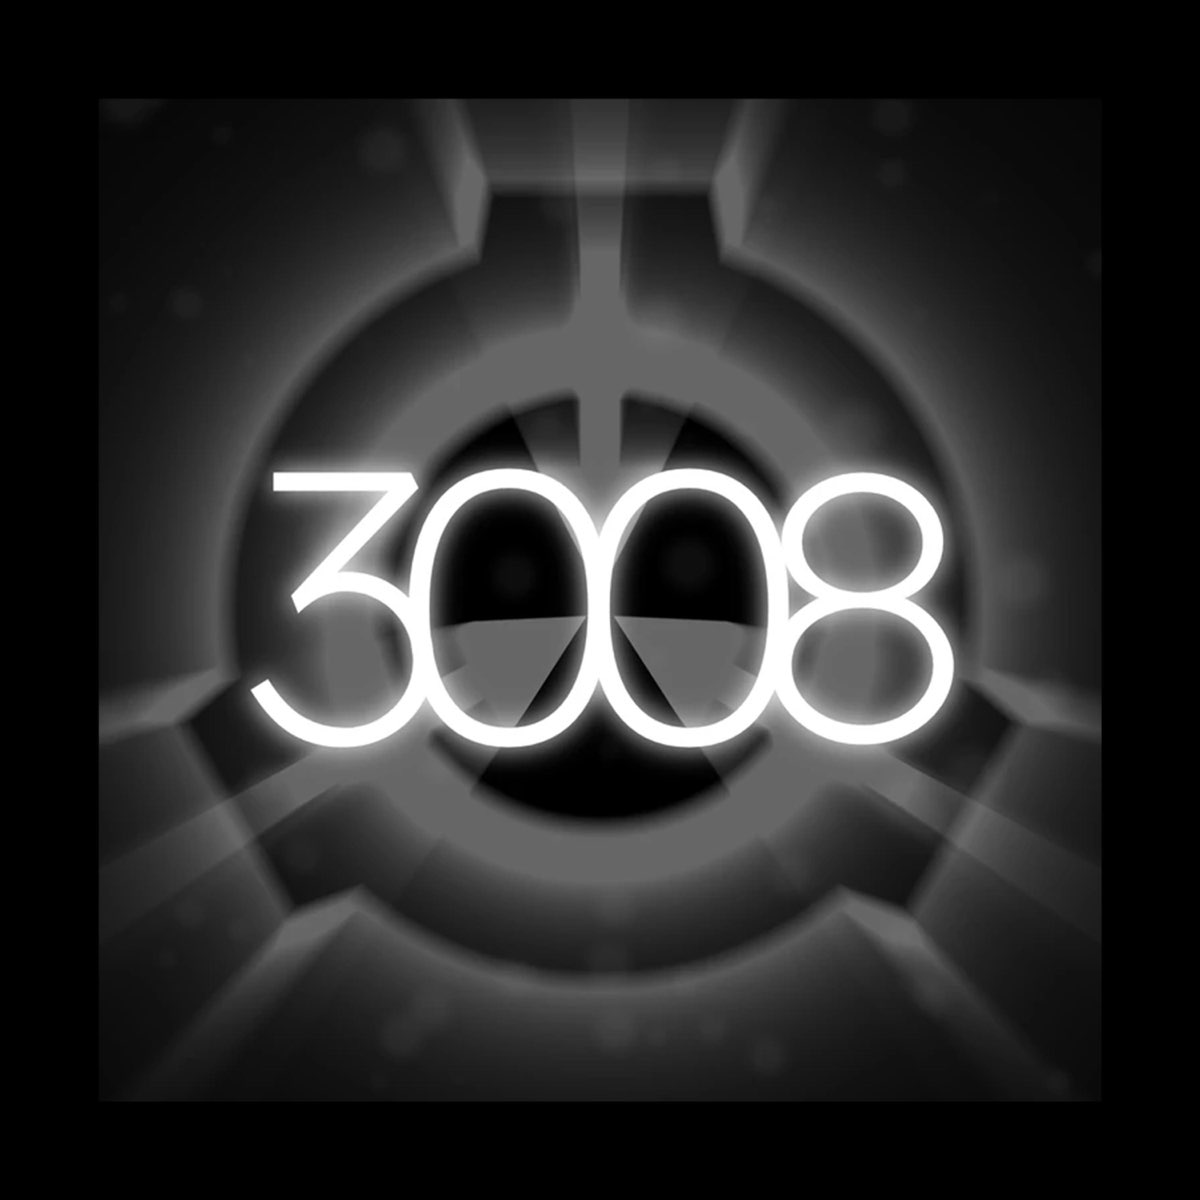 SCP-3008 OST (In order) 